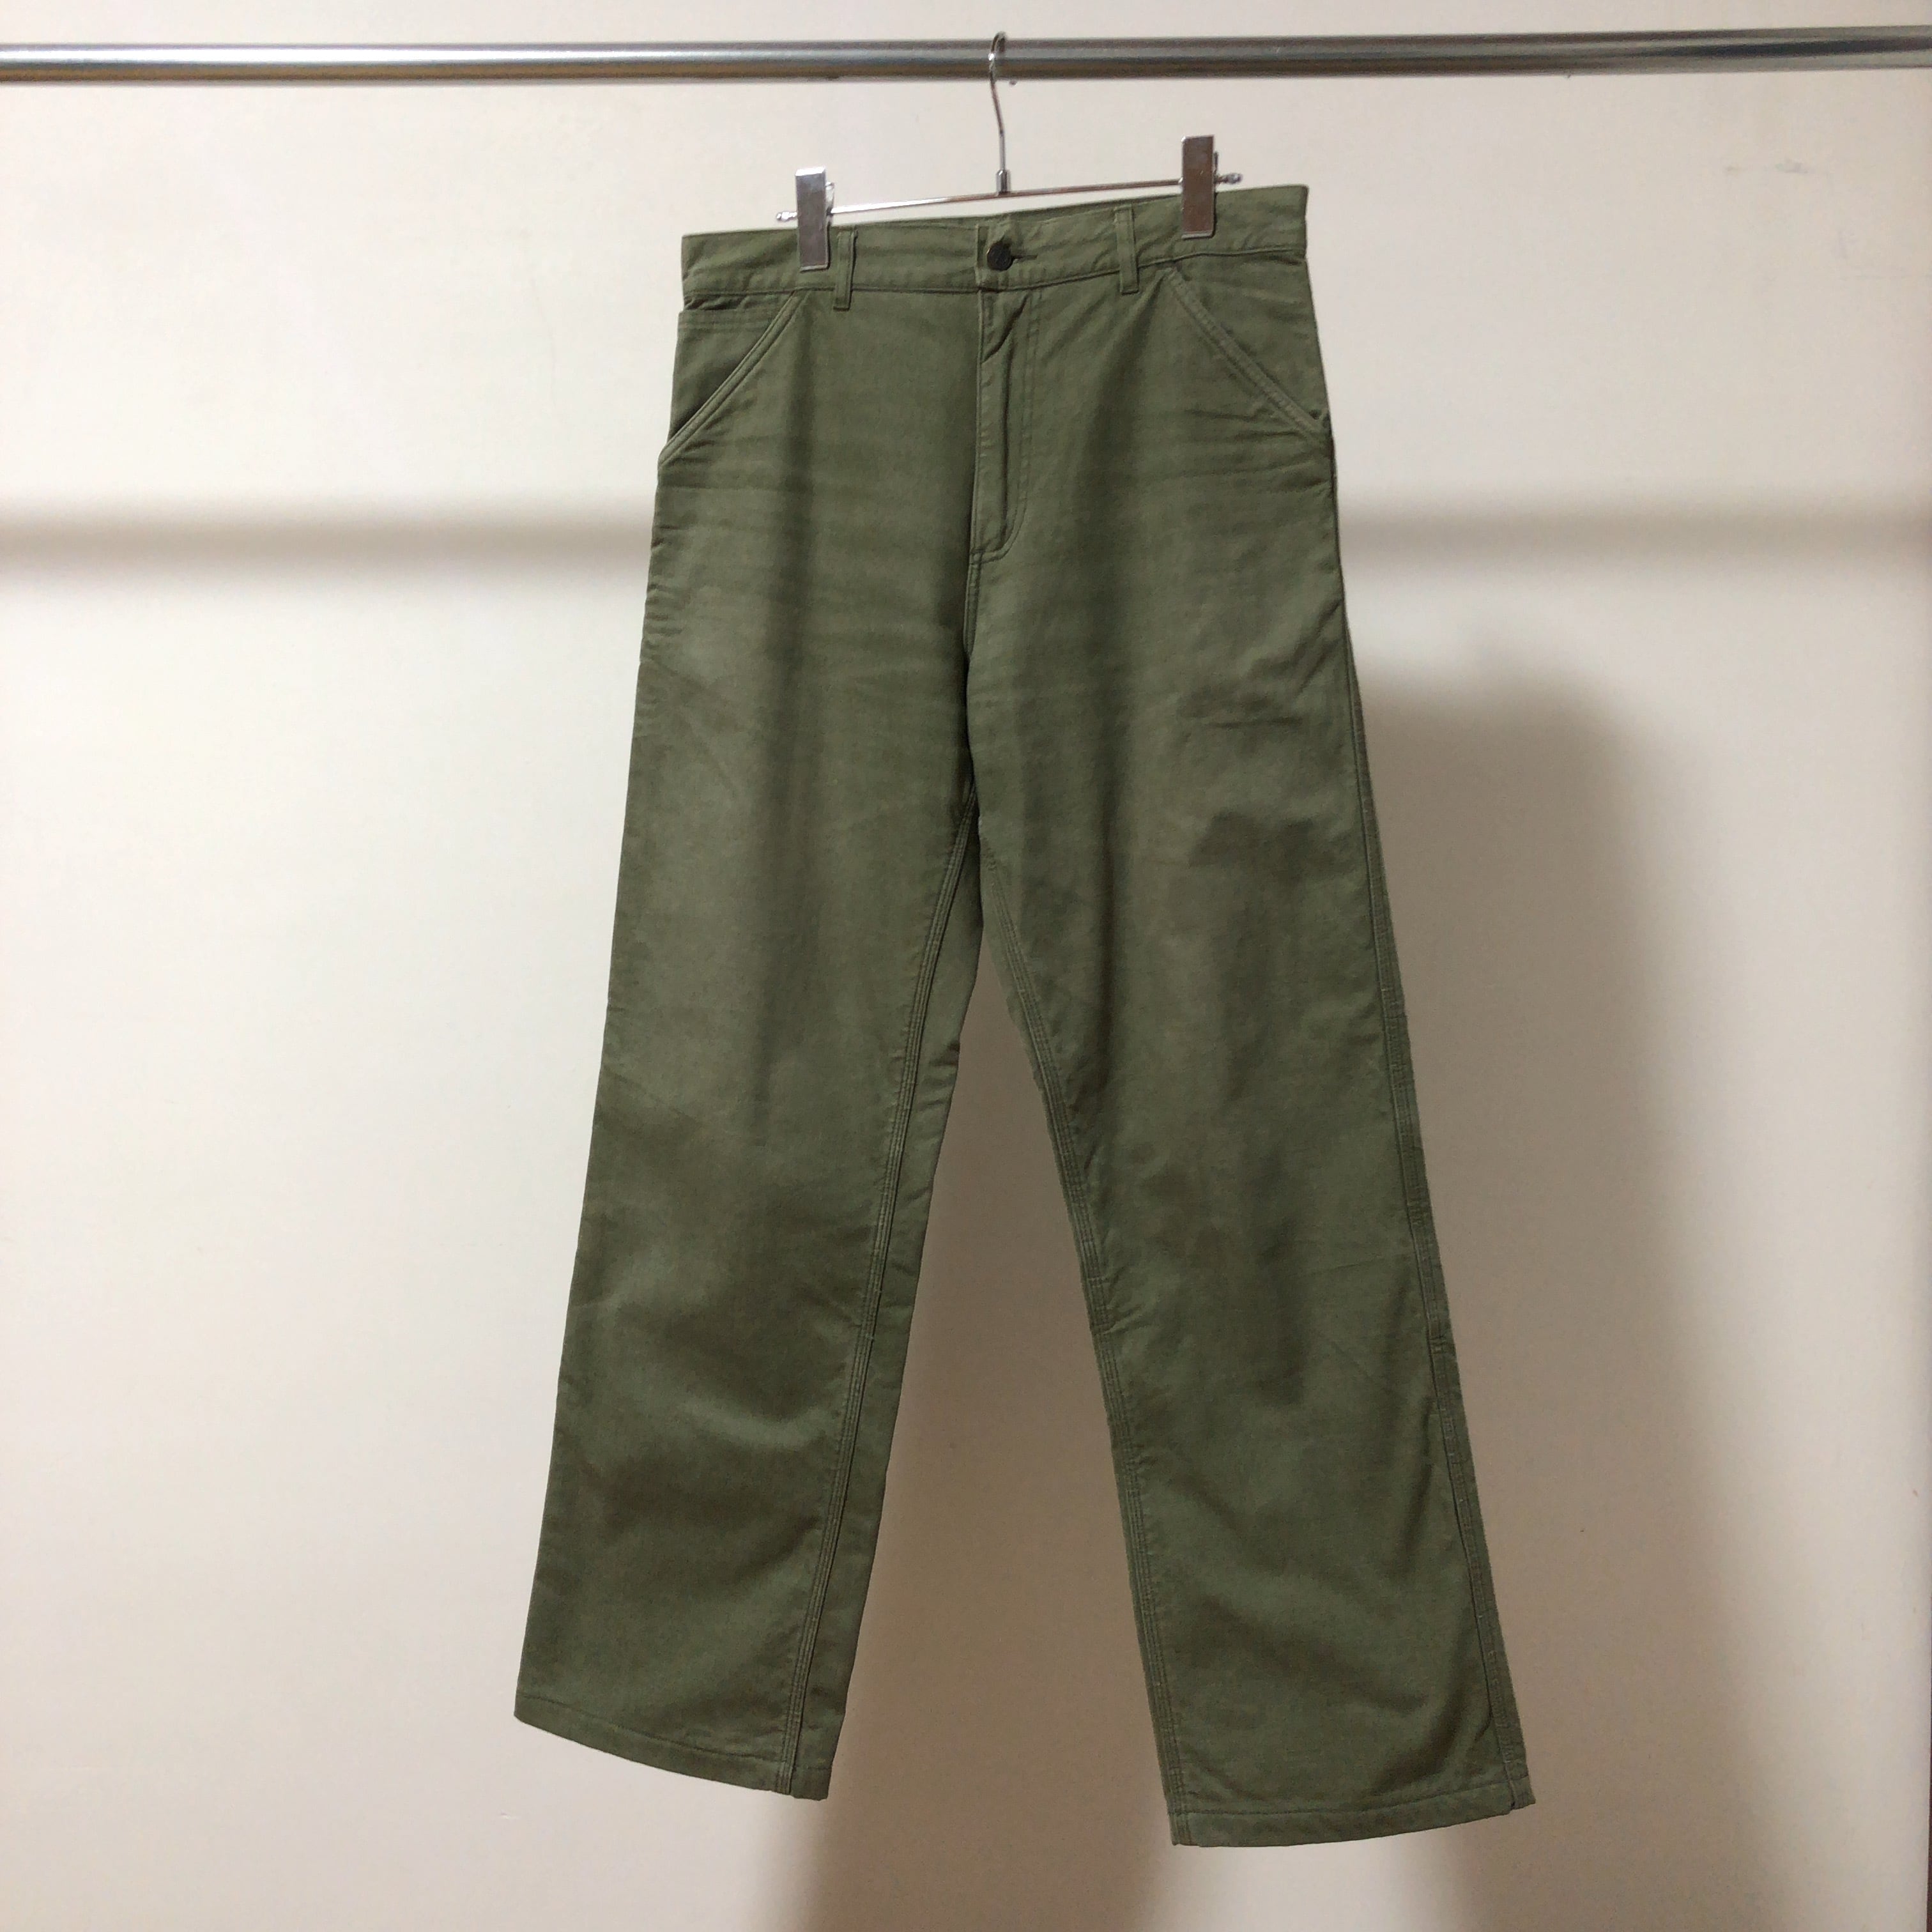 A.P.C. / 90-00's Cotton Canvas Work Pants with Fleece Lining